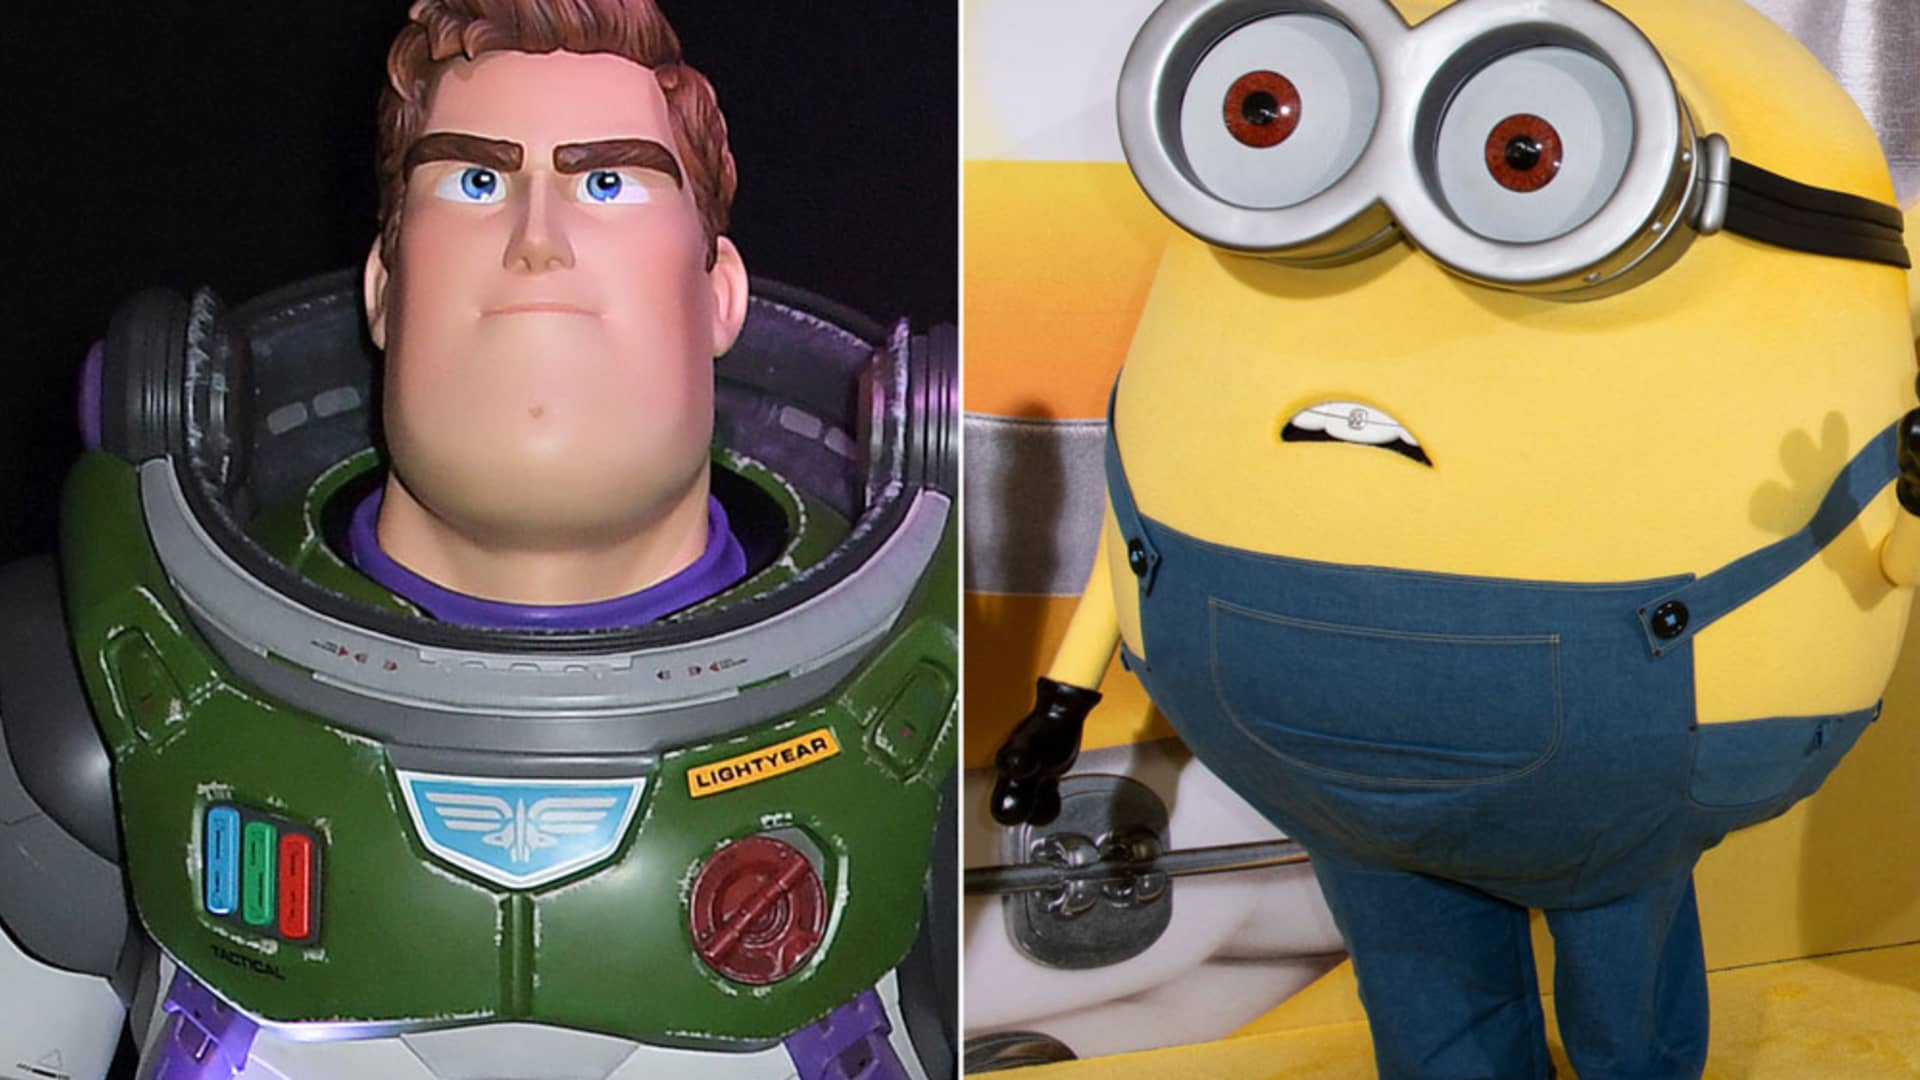 'Minions' vs. 'Lightyear:' Here's why the silly yellow blobs beat Buzz at the box office